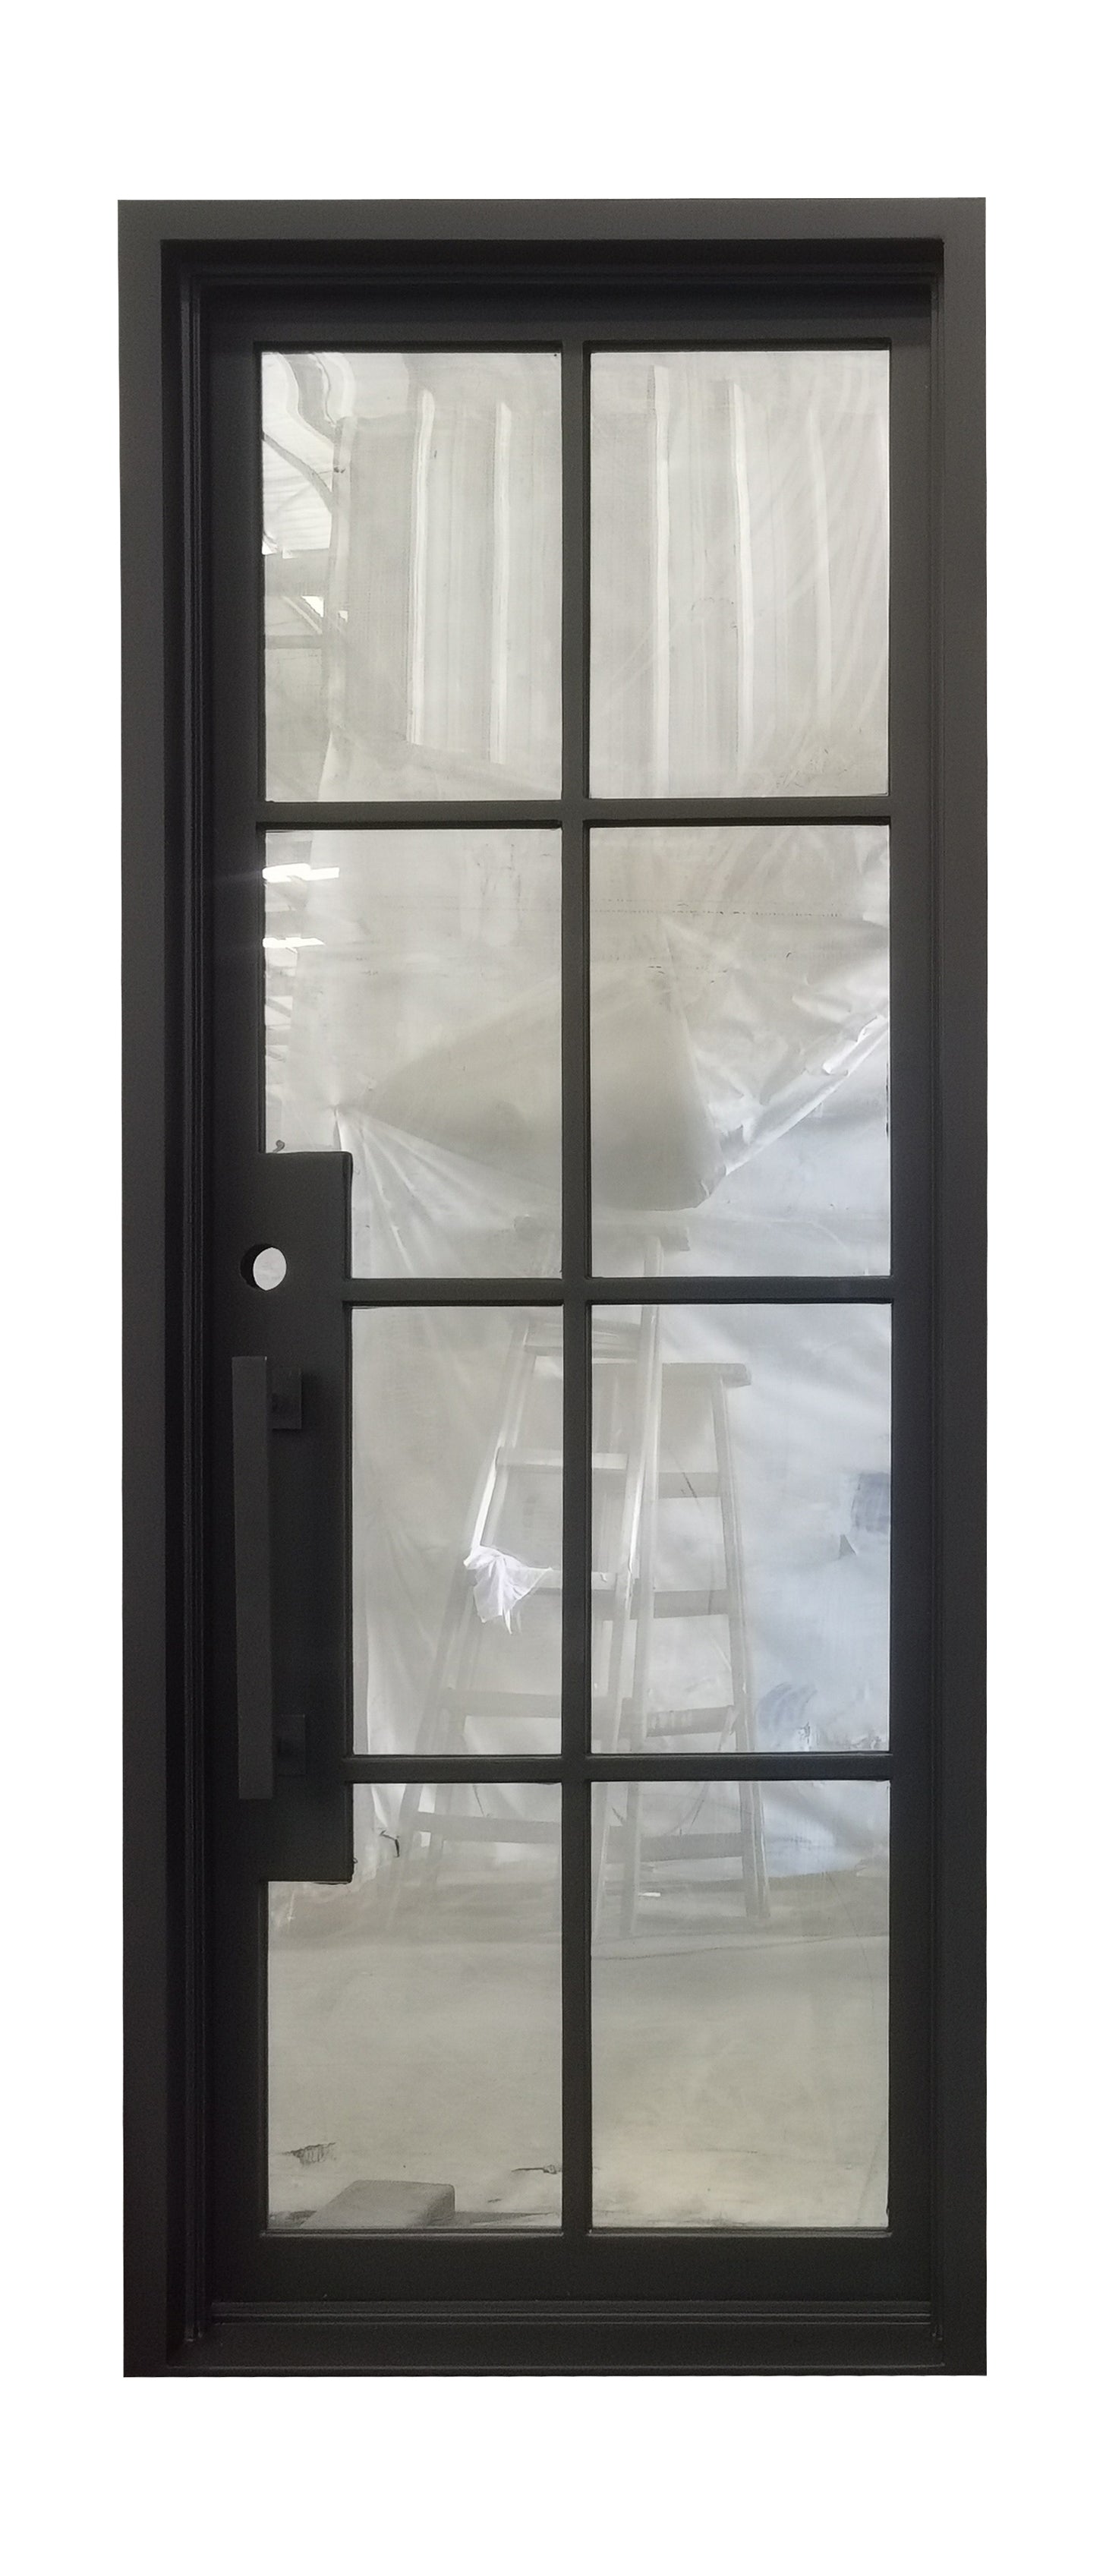 Bruceville Model Pre Hung Single Front Entry Wrought Iron Door With Low E Clear Glass Matte Black Finish